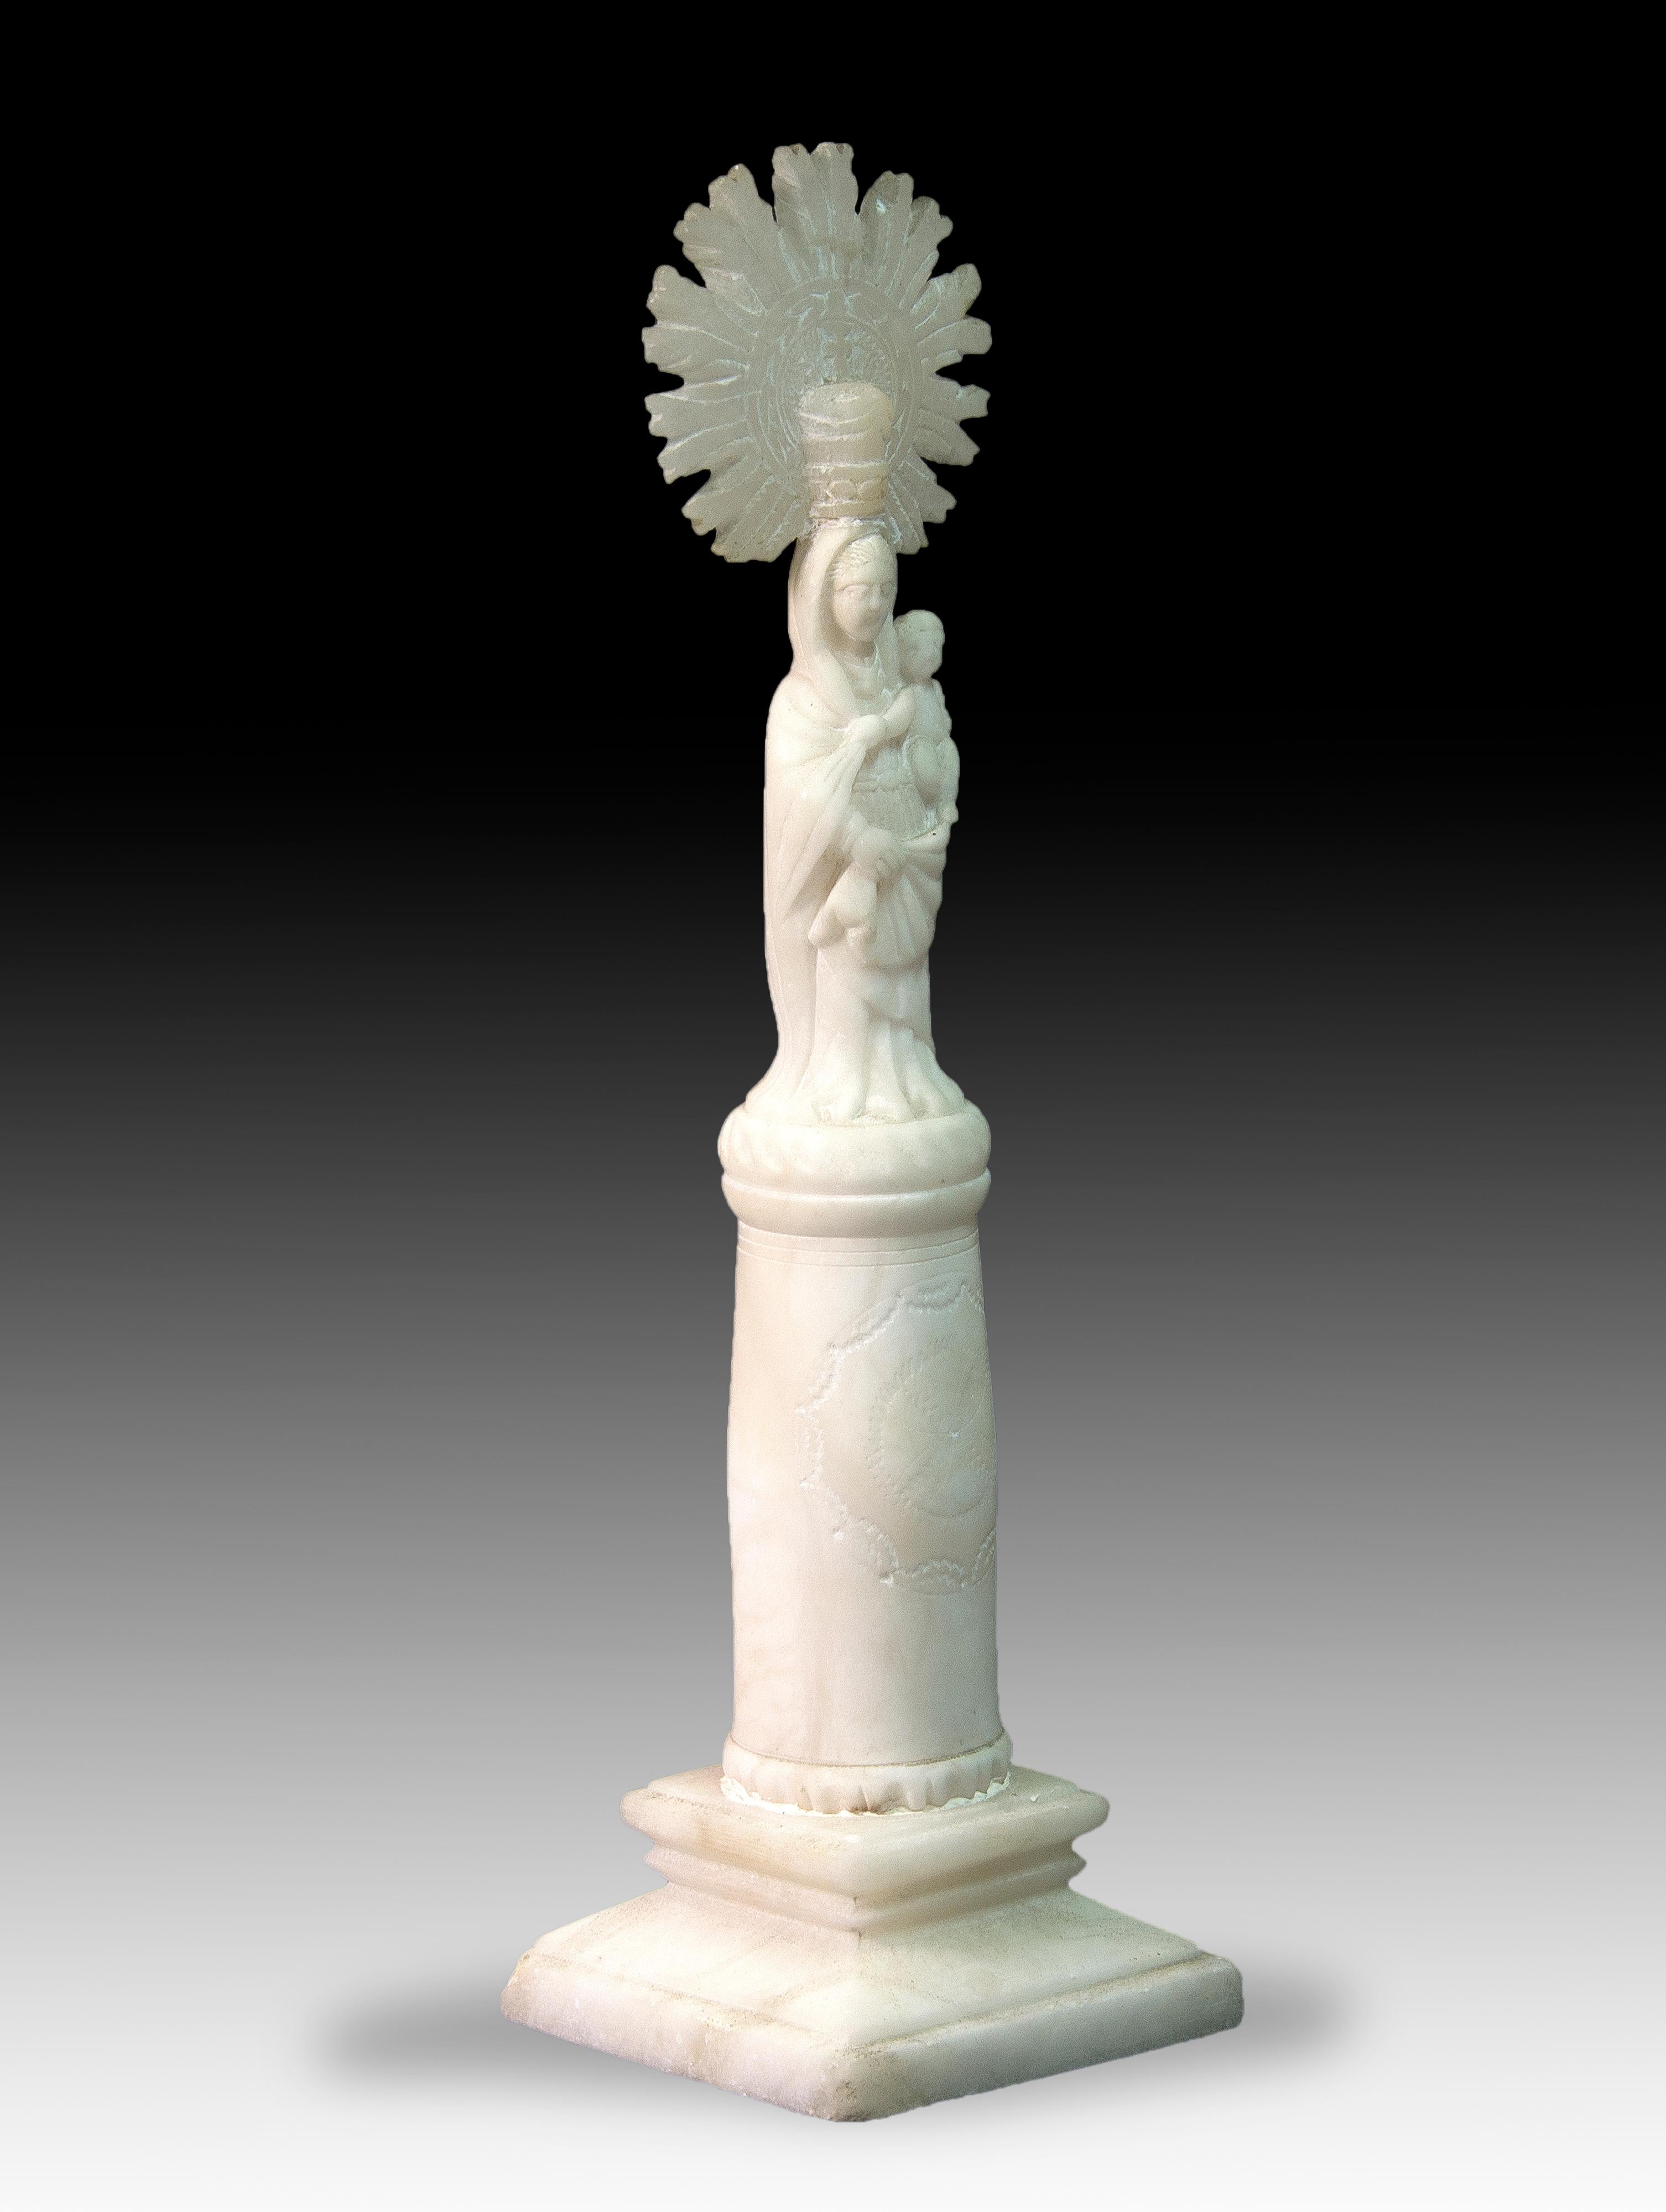 Virgin of the Pillar. Alabaster. Spain, XIX century. 
Carved alabaster figure showing the Virgen del Pilar de Zaragoza. Christian tradition indicates that, around the year 40, Mary appeared to Santiago Apóstol in Caesaraugusta (the future Zaragoza)